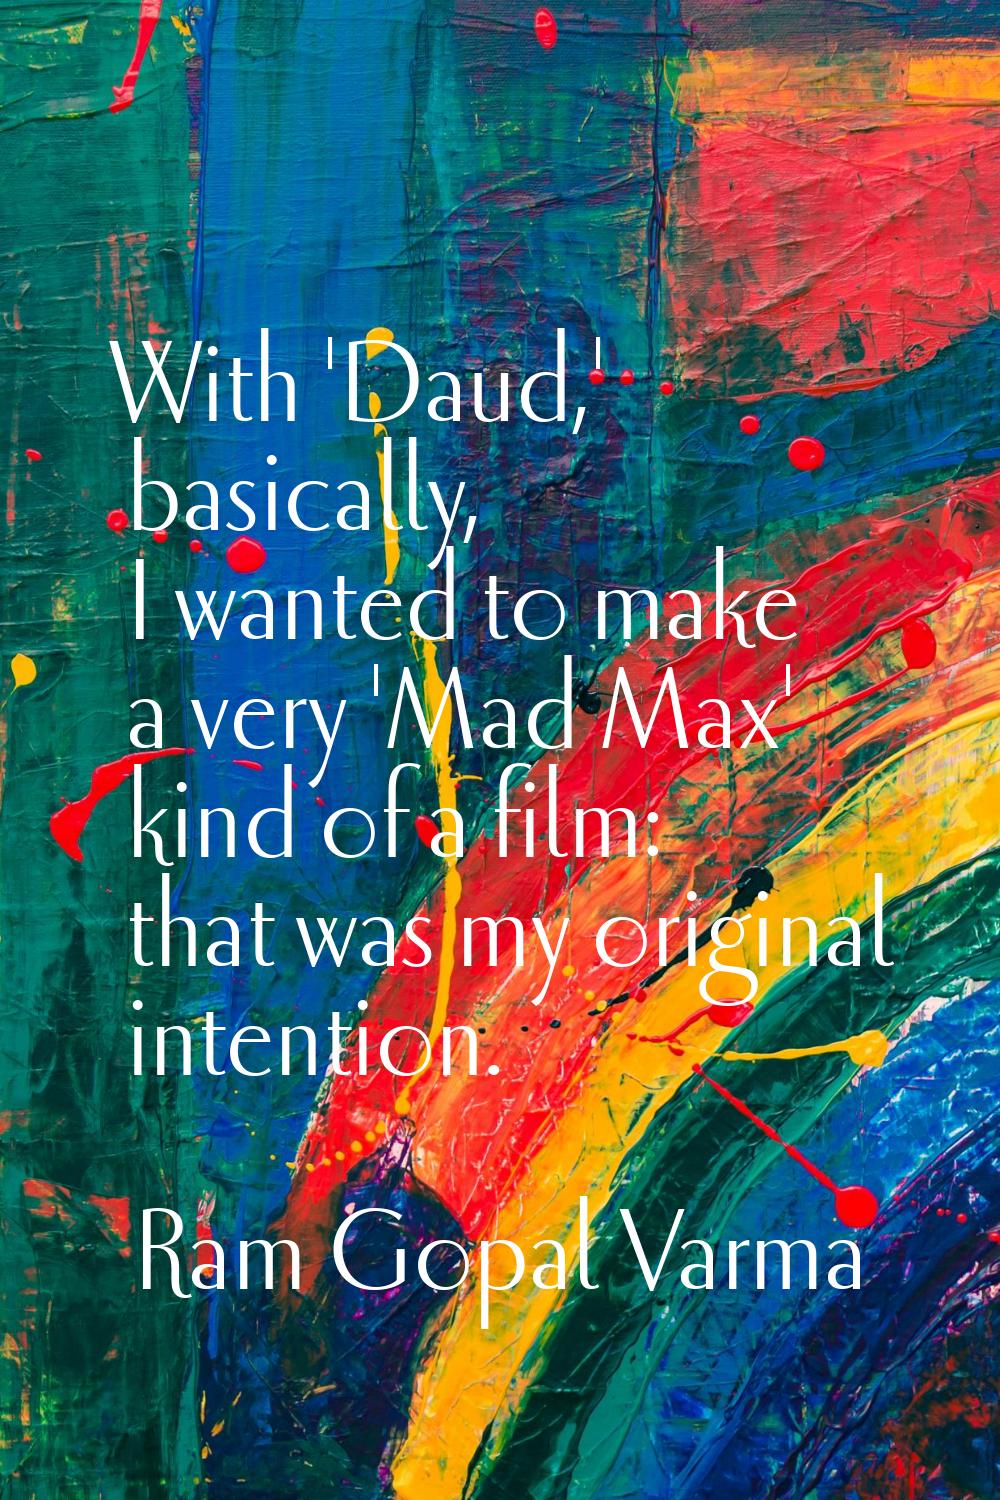 With 'Daud,' basically, I wanted to make a very 'Mad Max' kind of a film: that was my original inte